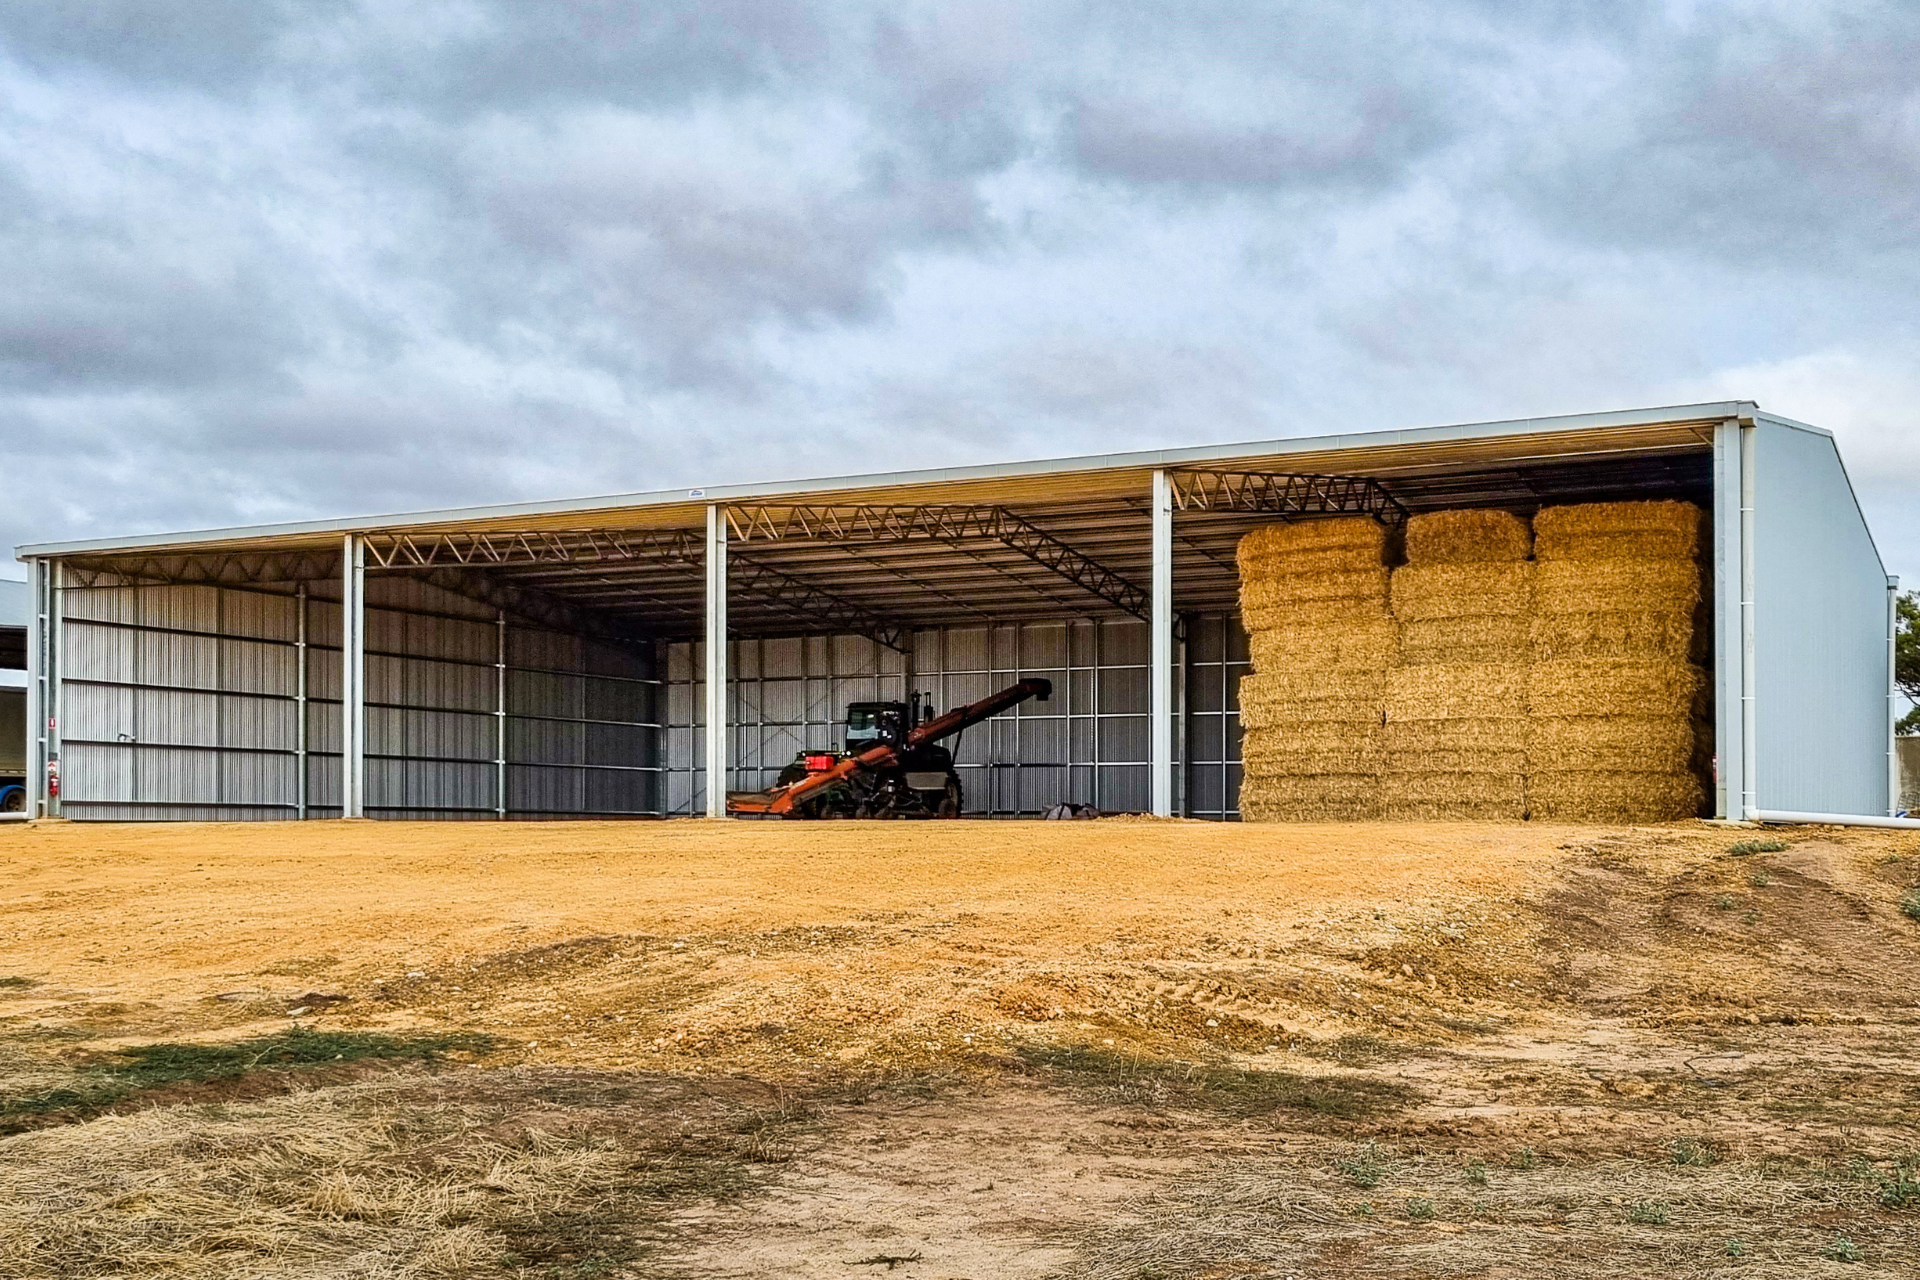 You are currently viewing 36m x 24m x 6m hay shed